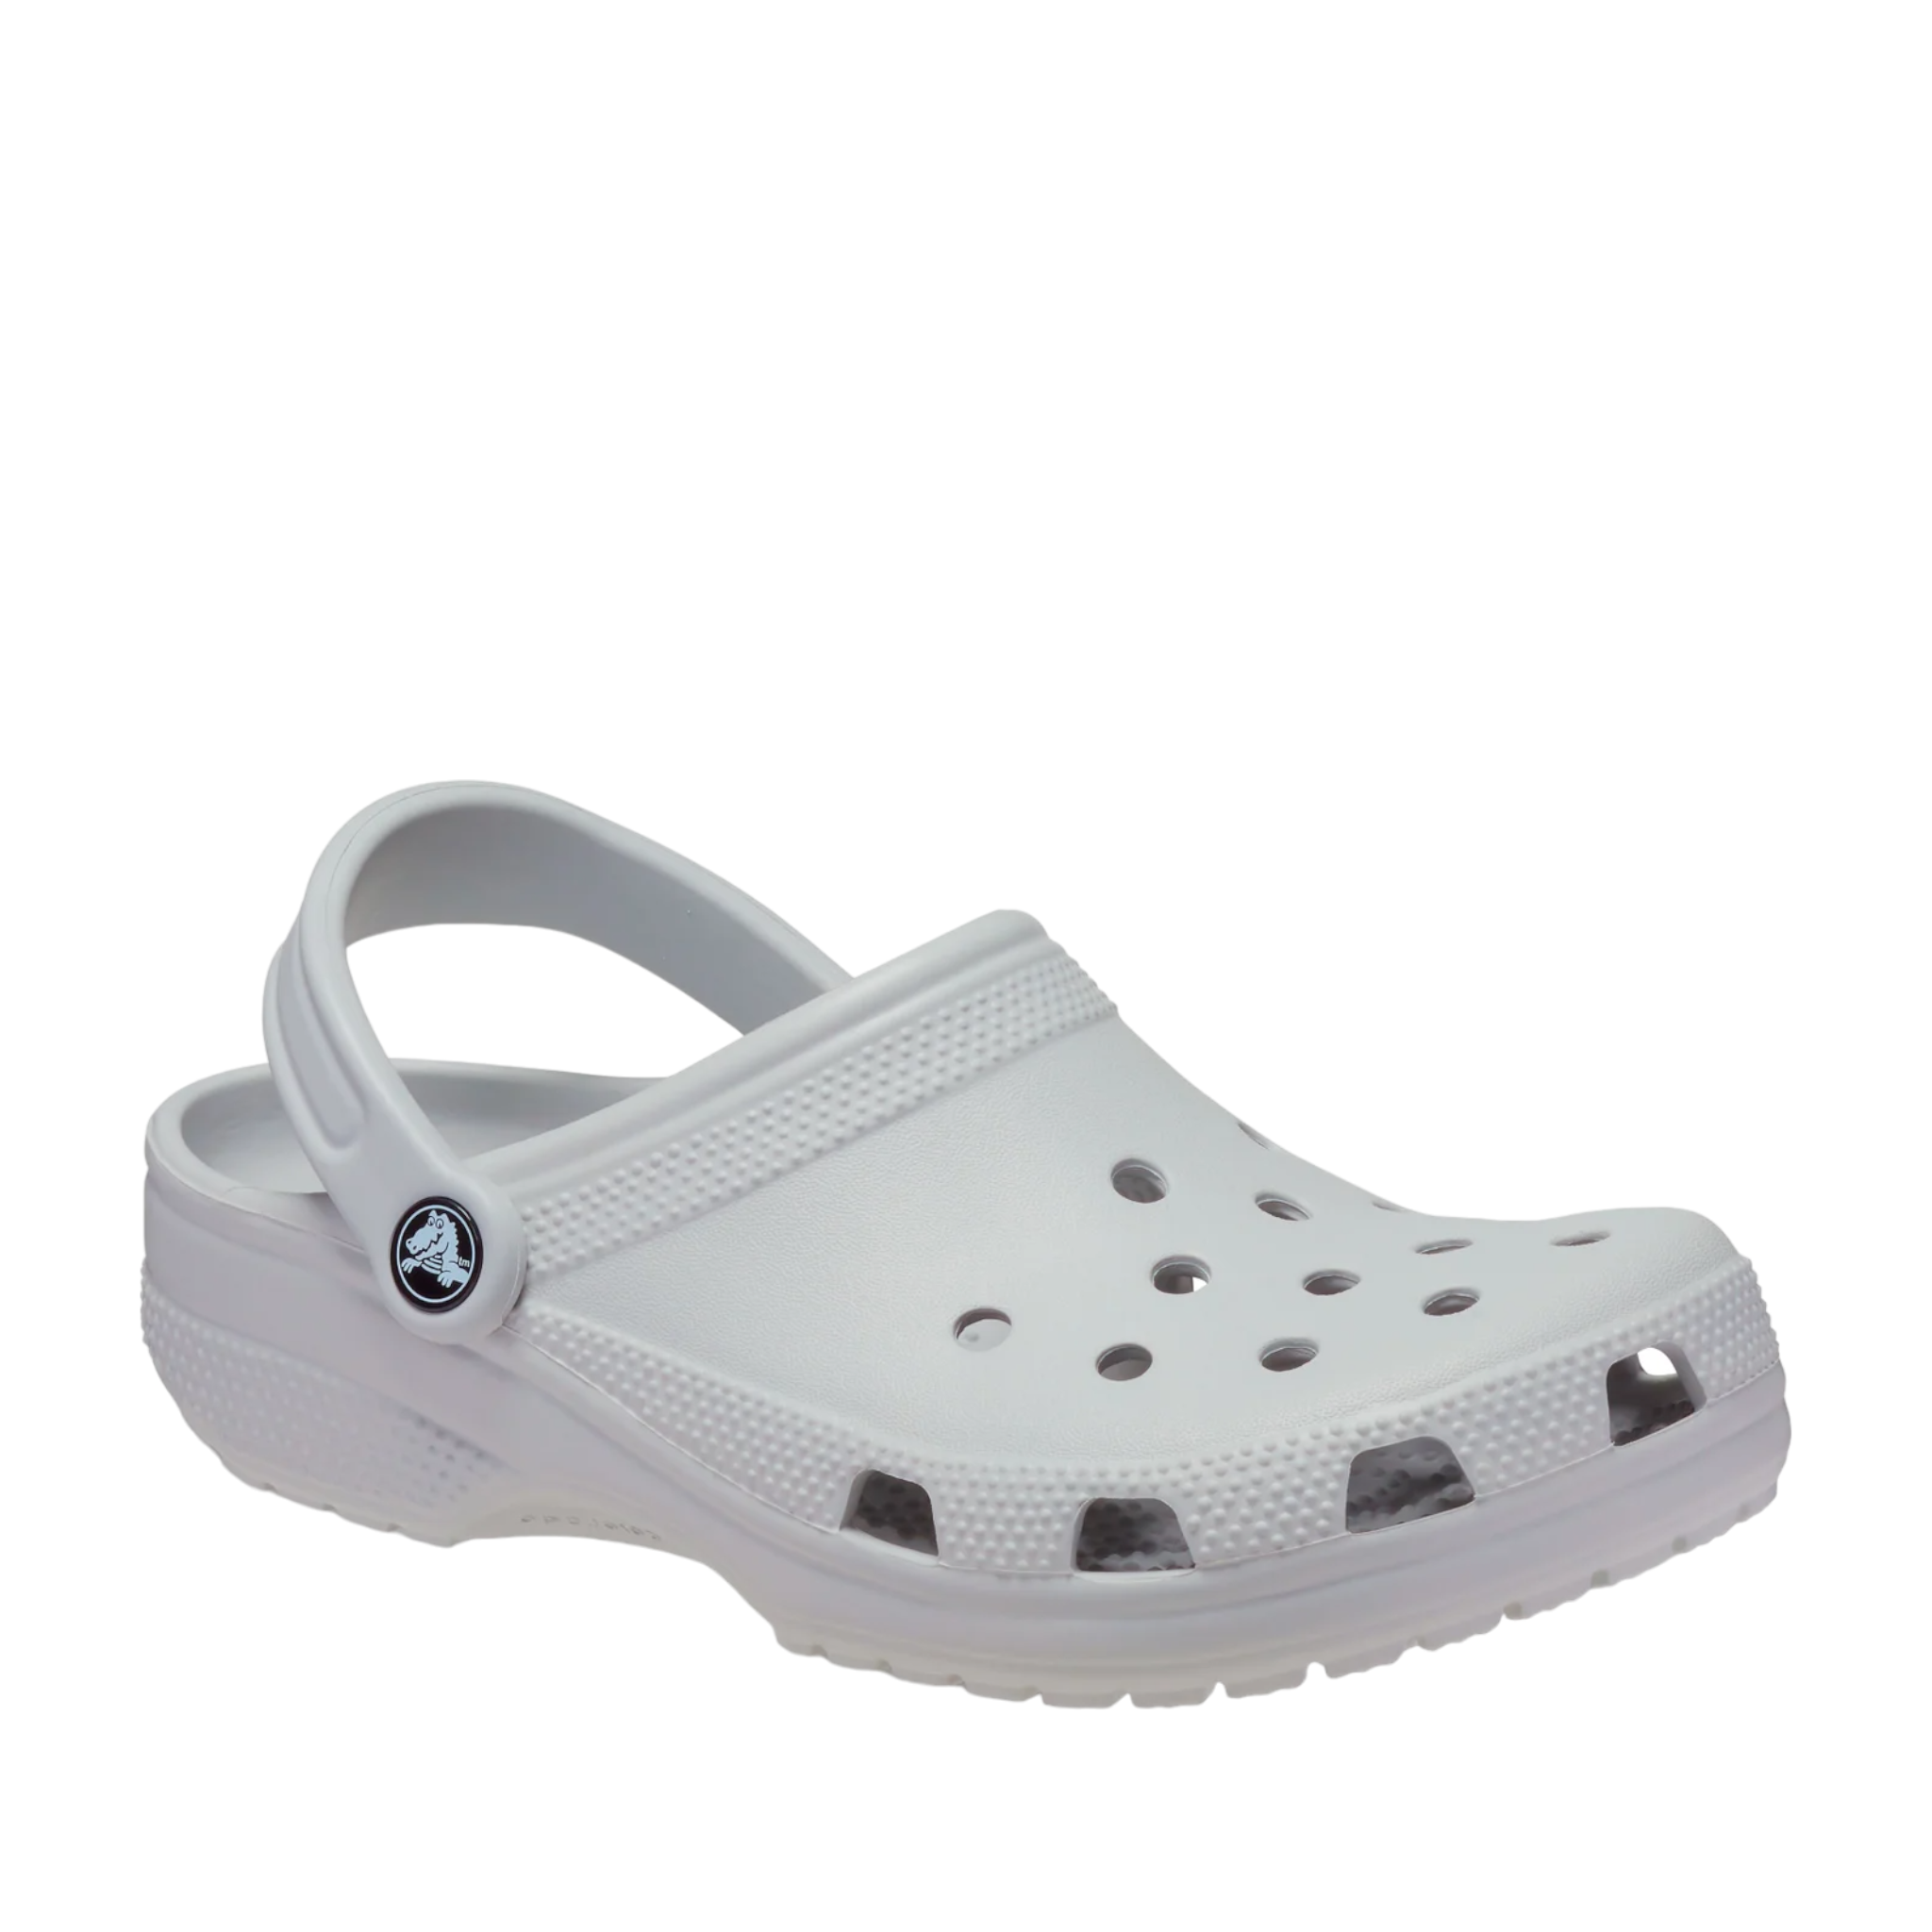 Crocs Classic Clogs online and instore with shoe&me Mount Maunganui. Shop Atmosphere Clogs